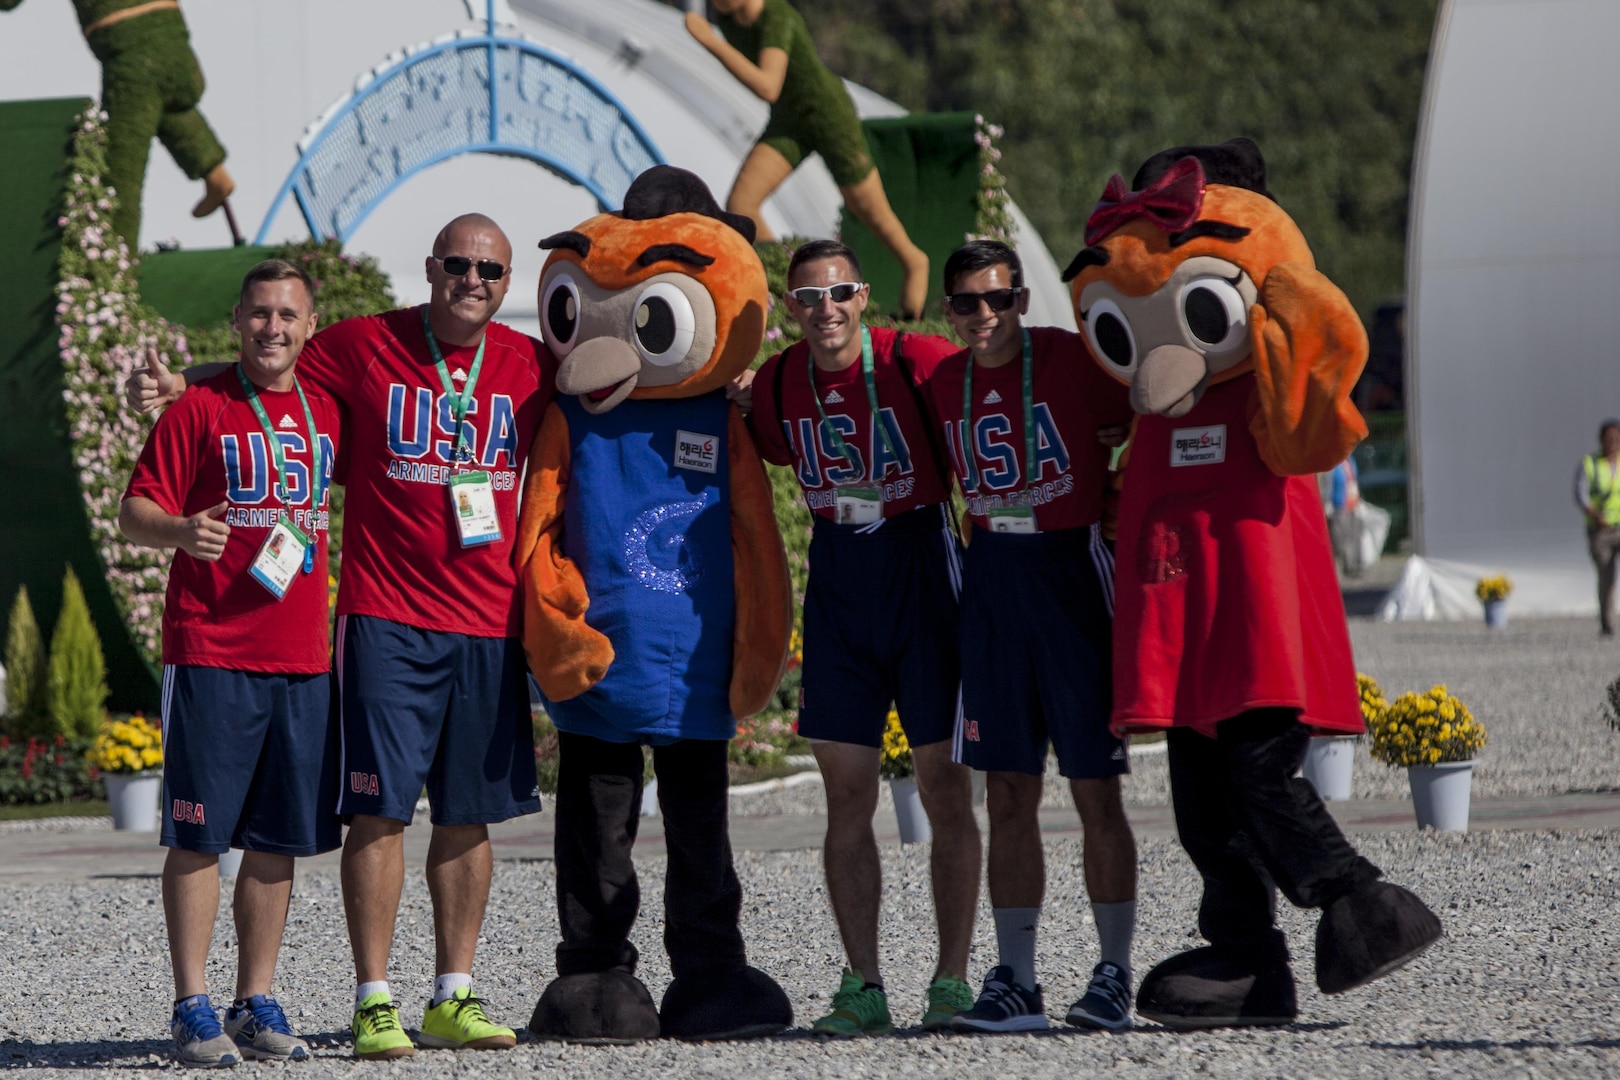 United States Men’s Soccer Team Members pose for pictures with the Mascots for the 2015 6th CISM World Games during the Athlete Village Opening Ceremony. The CISM World Games provides the opportunity for the athletes of over 100 different Nations to come together and enjoy friendship through sport. The sixth annual CISM World Games are being held aboard Mungyeong, South Korea., Sept. 30 - Oct. 11.  (Photo by Sgt. Ashley N. Cano)